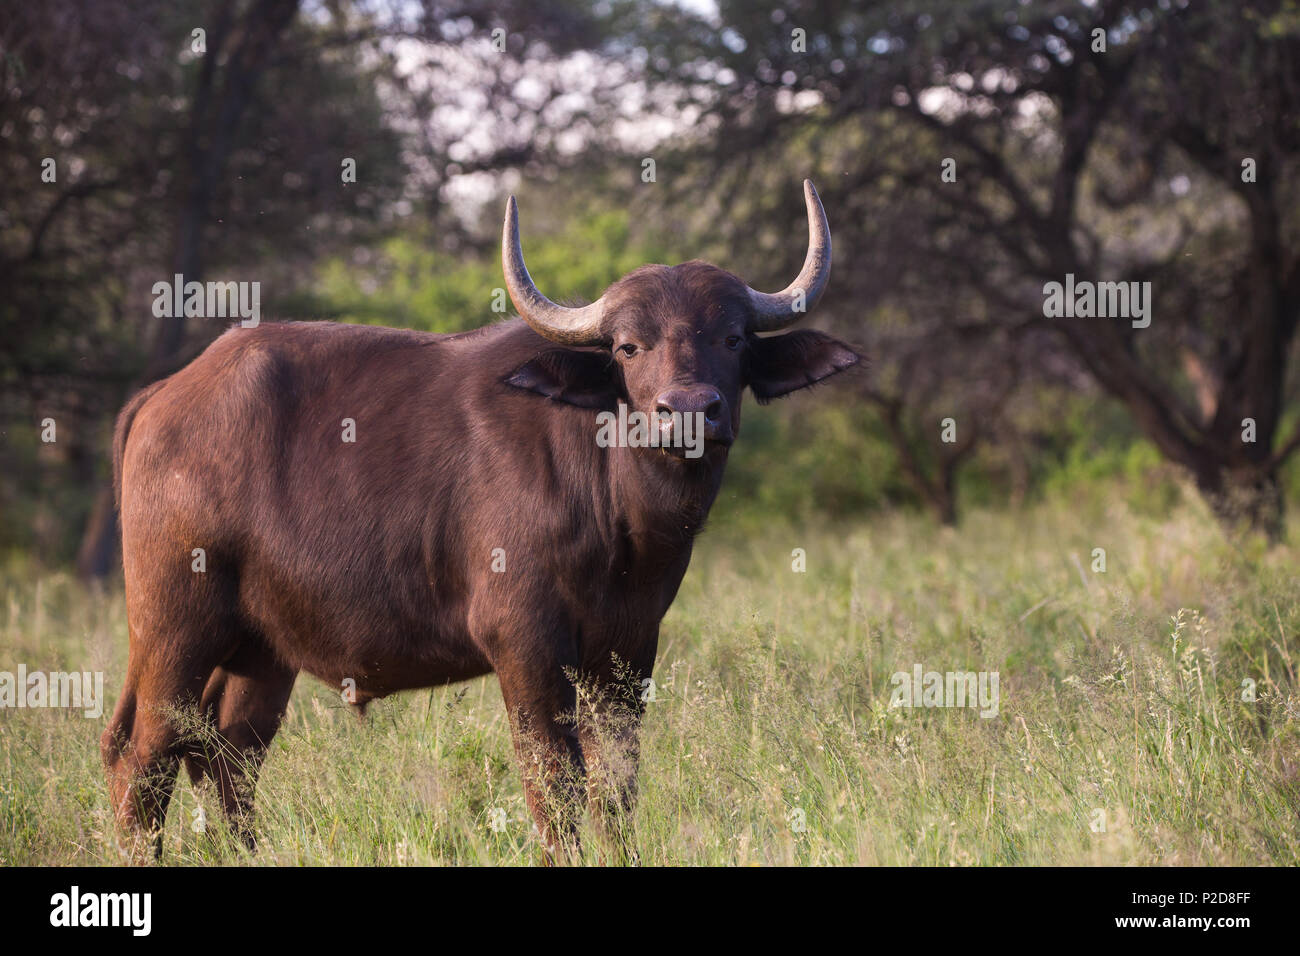 Cape Buffalo (Syncerus caffer caffer) closeup makes eye contact in the wild at Mokala national park, Northern Cape, South Africa Stock Photo